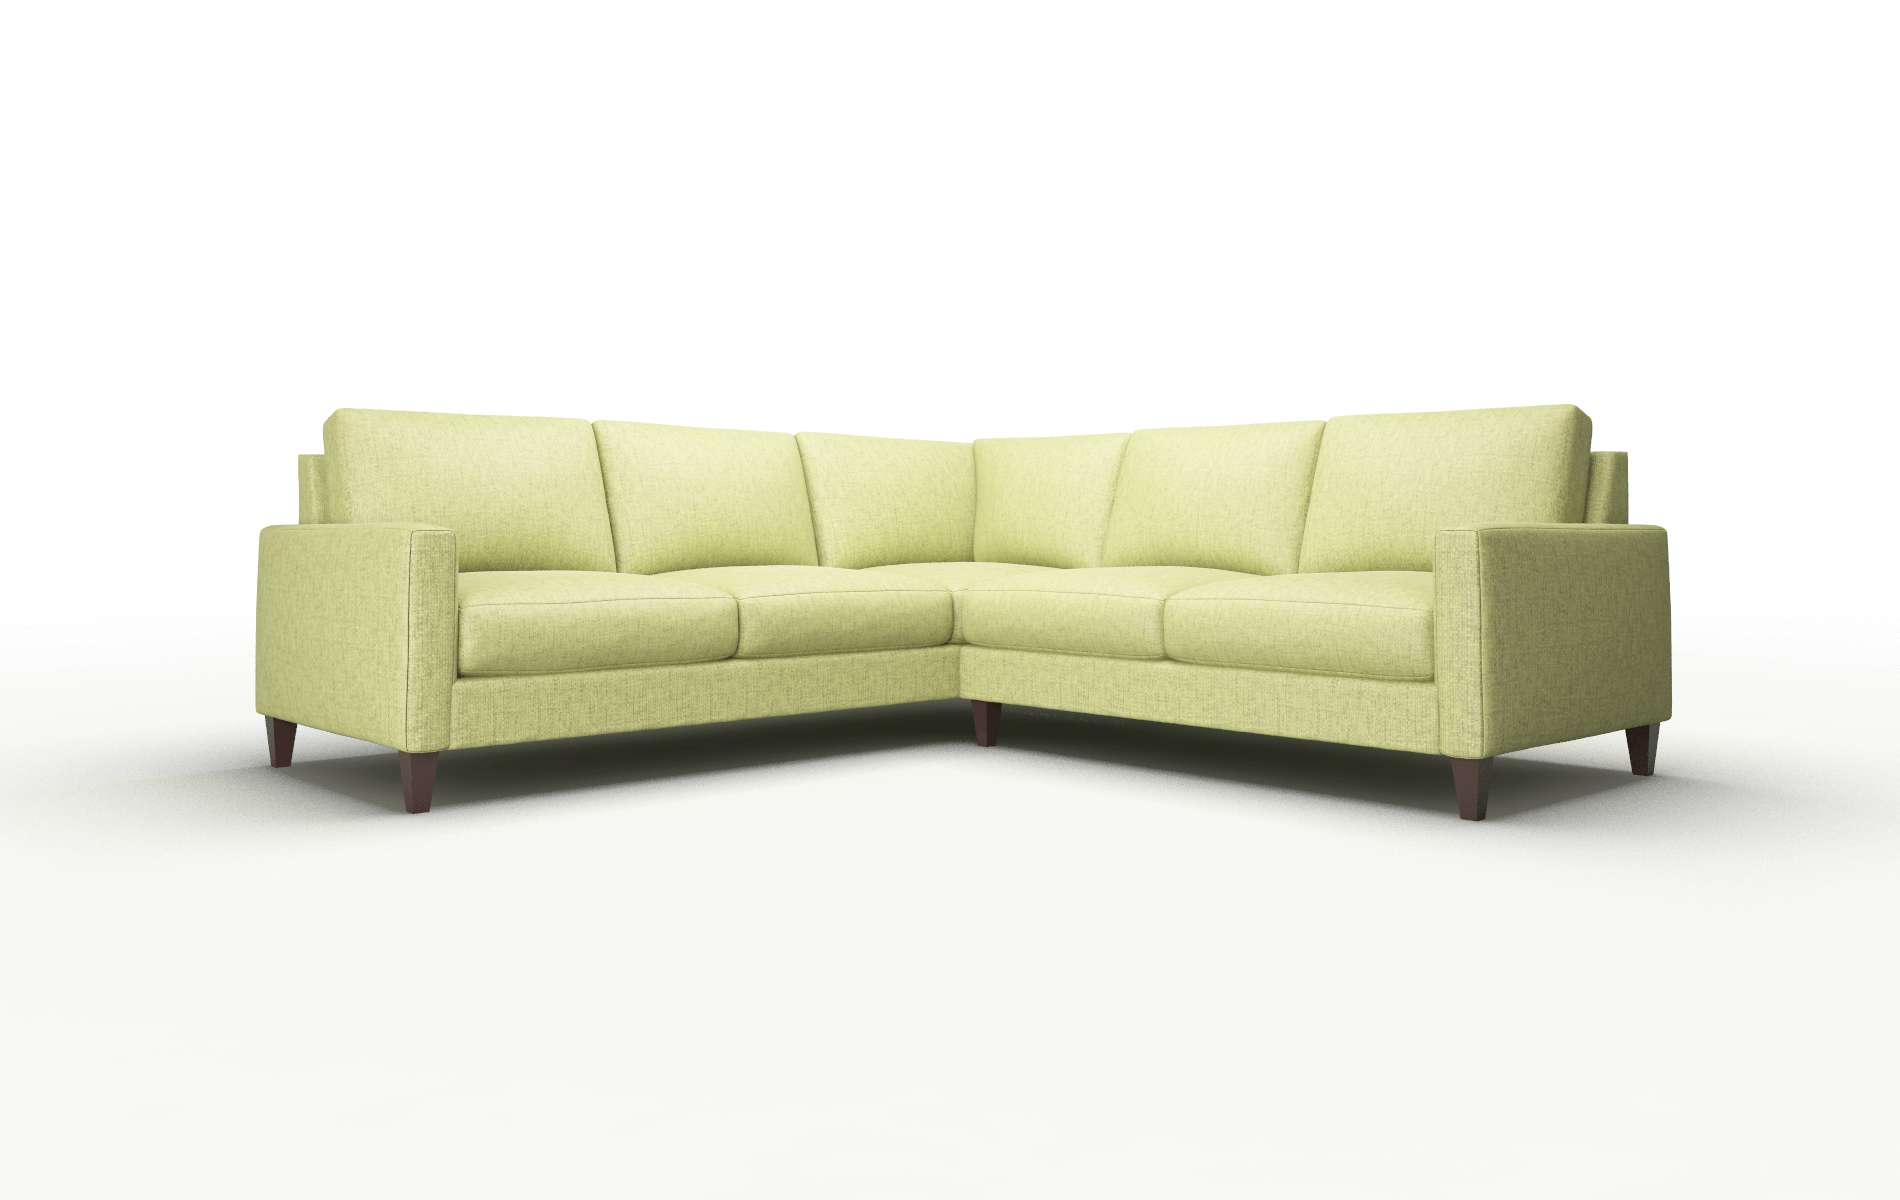 Cannes Notion Appletini Sectional espresso legs